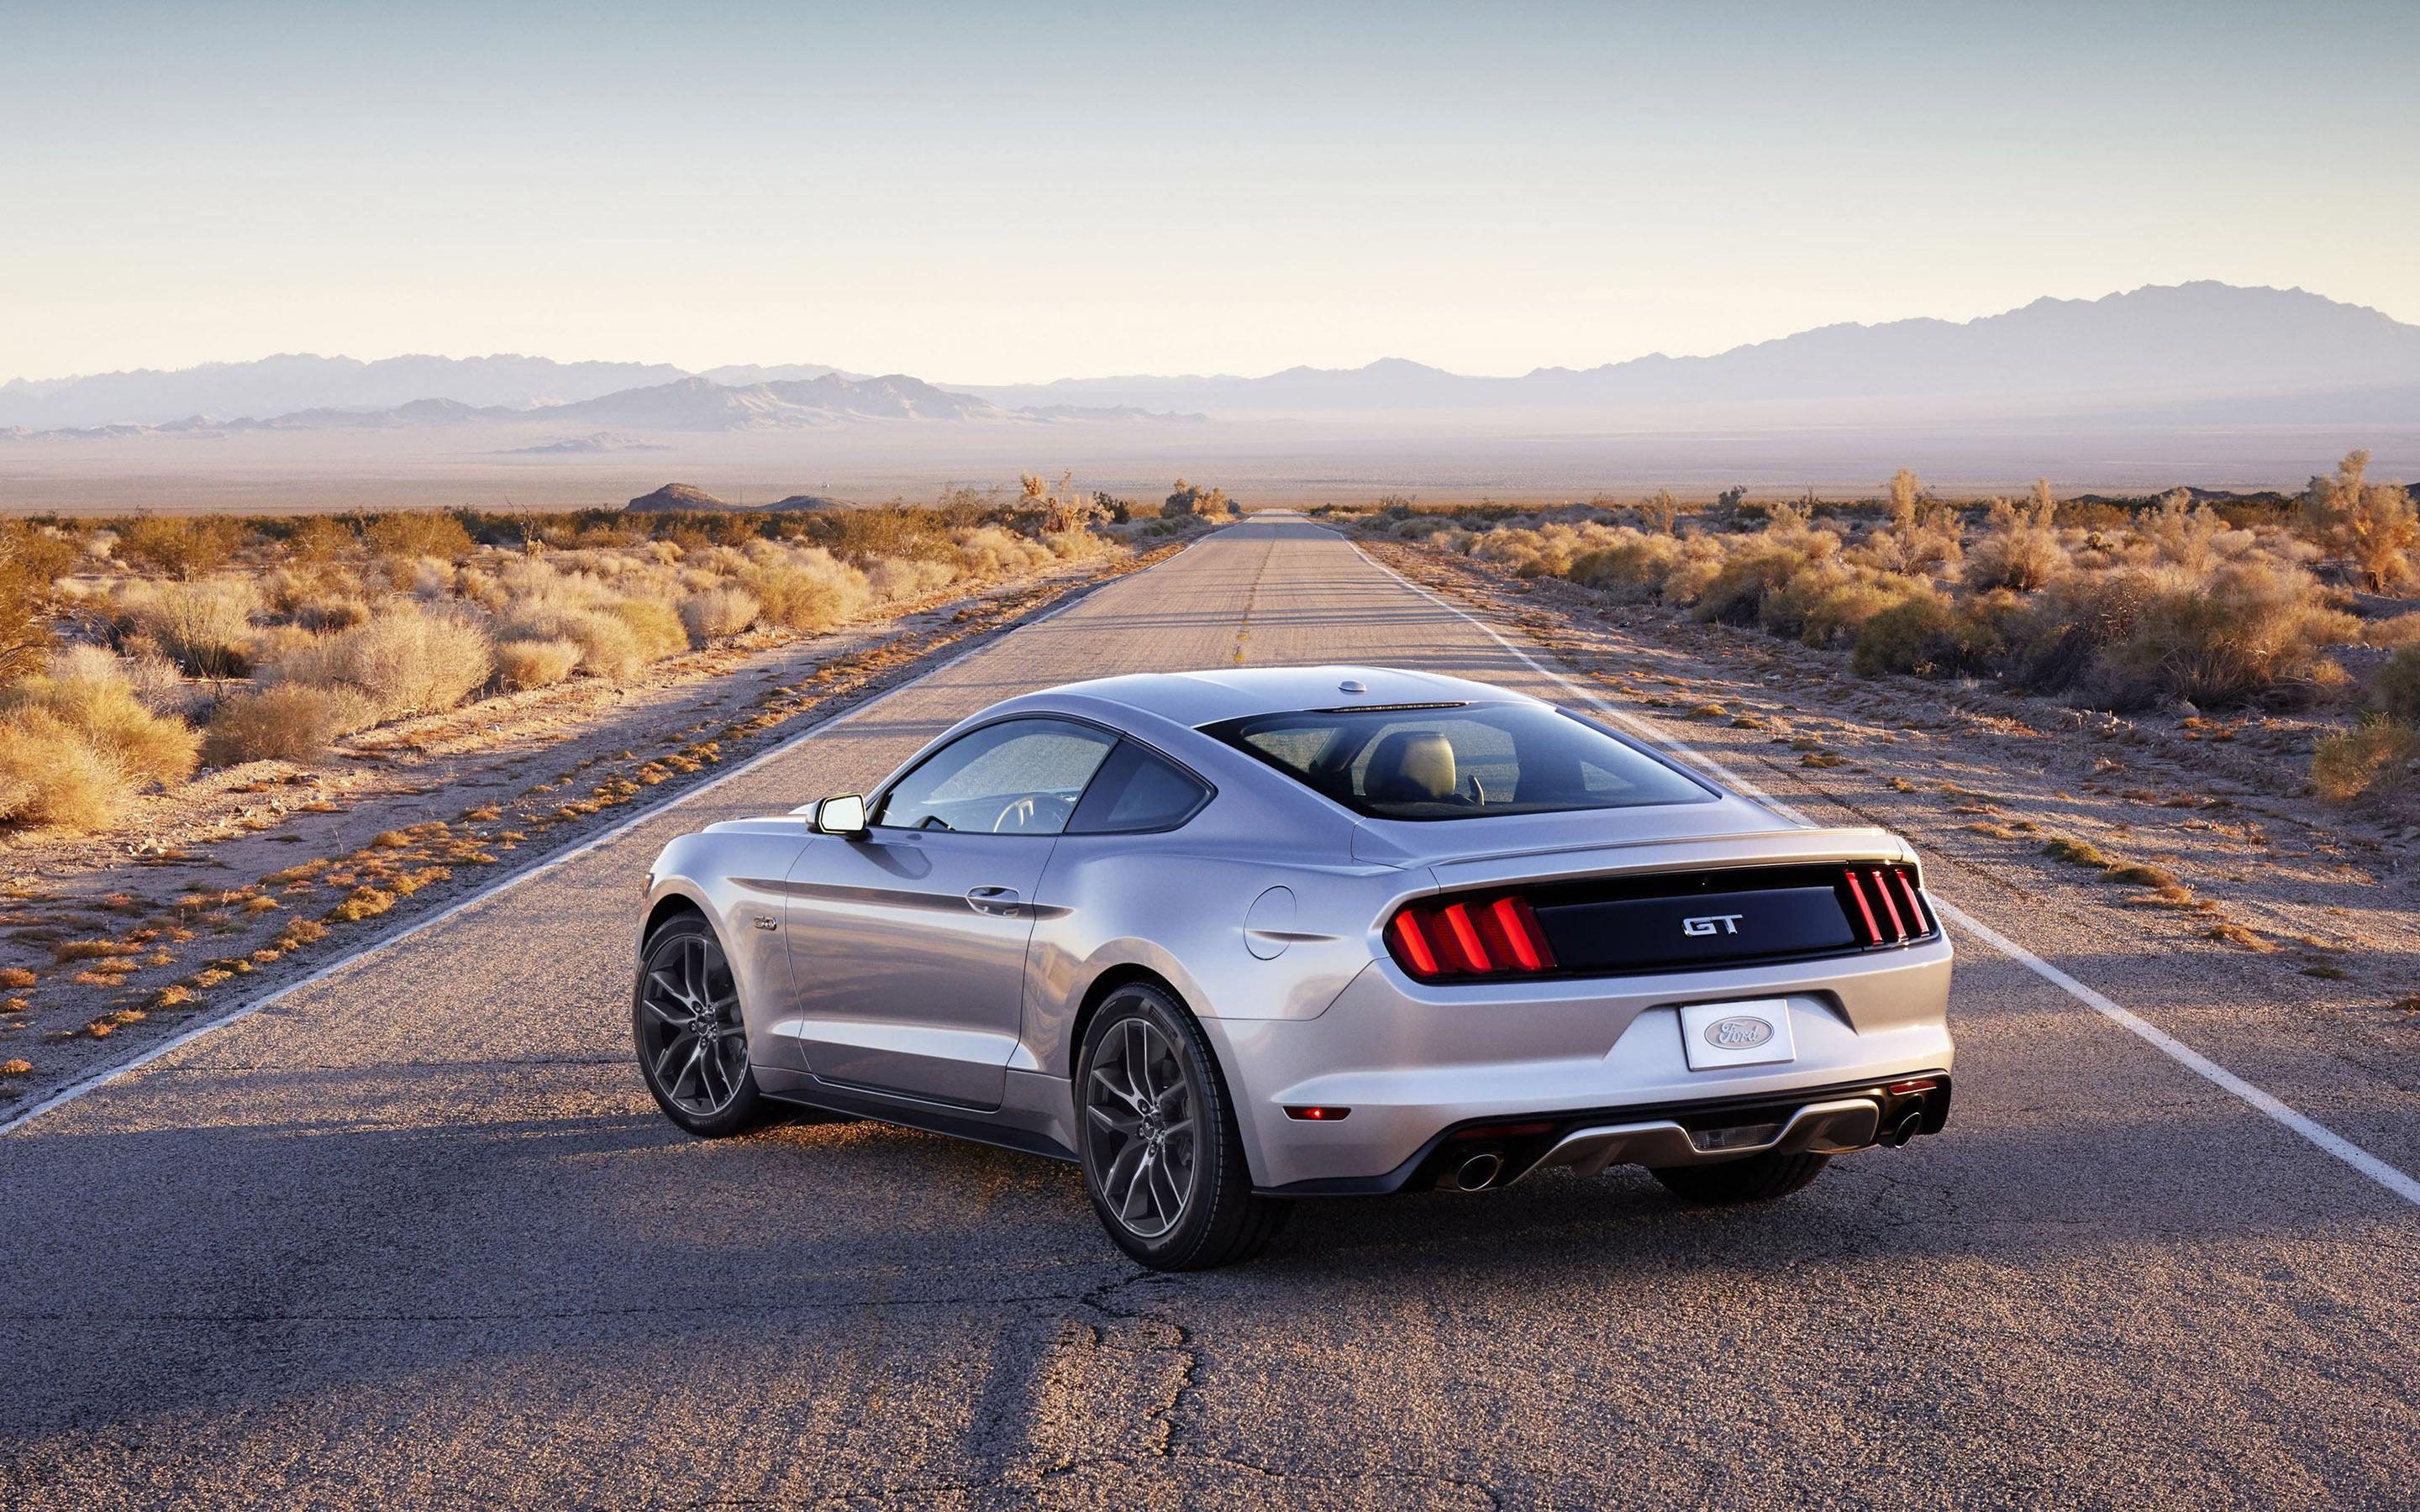 Hd 2015 Ford Mustang Gt On The Desert Road Wallpaper - Ford Mustang Gt 2017 Silver - HD Wallpaper 